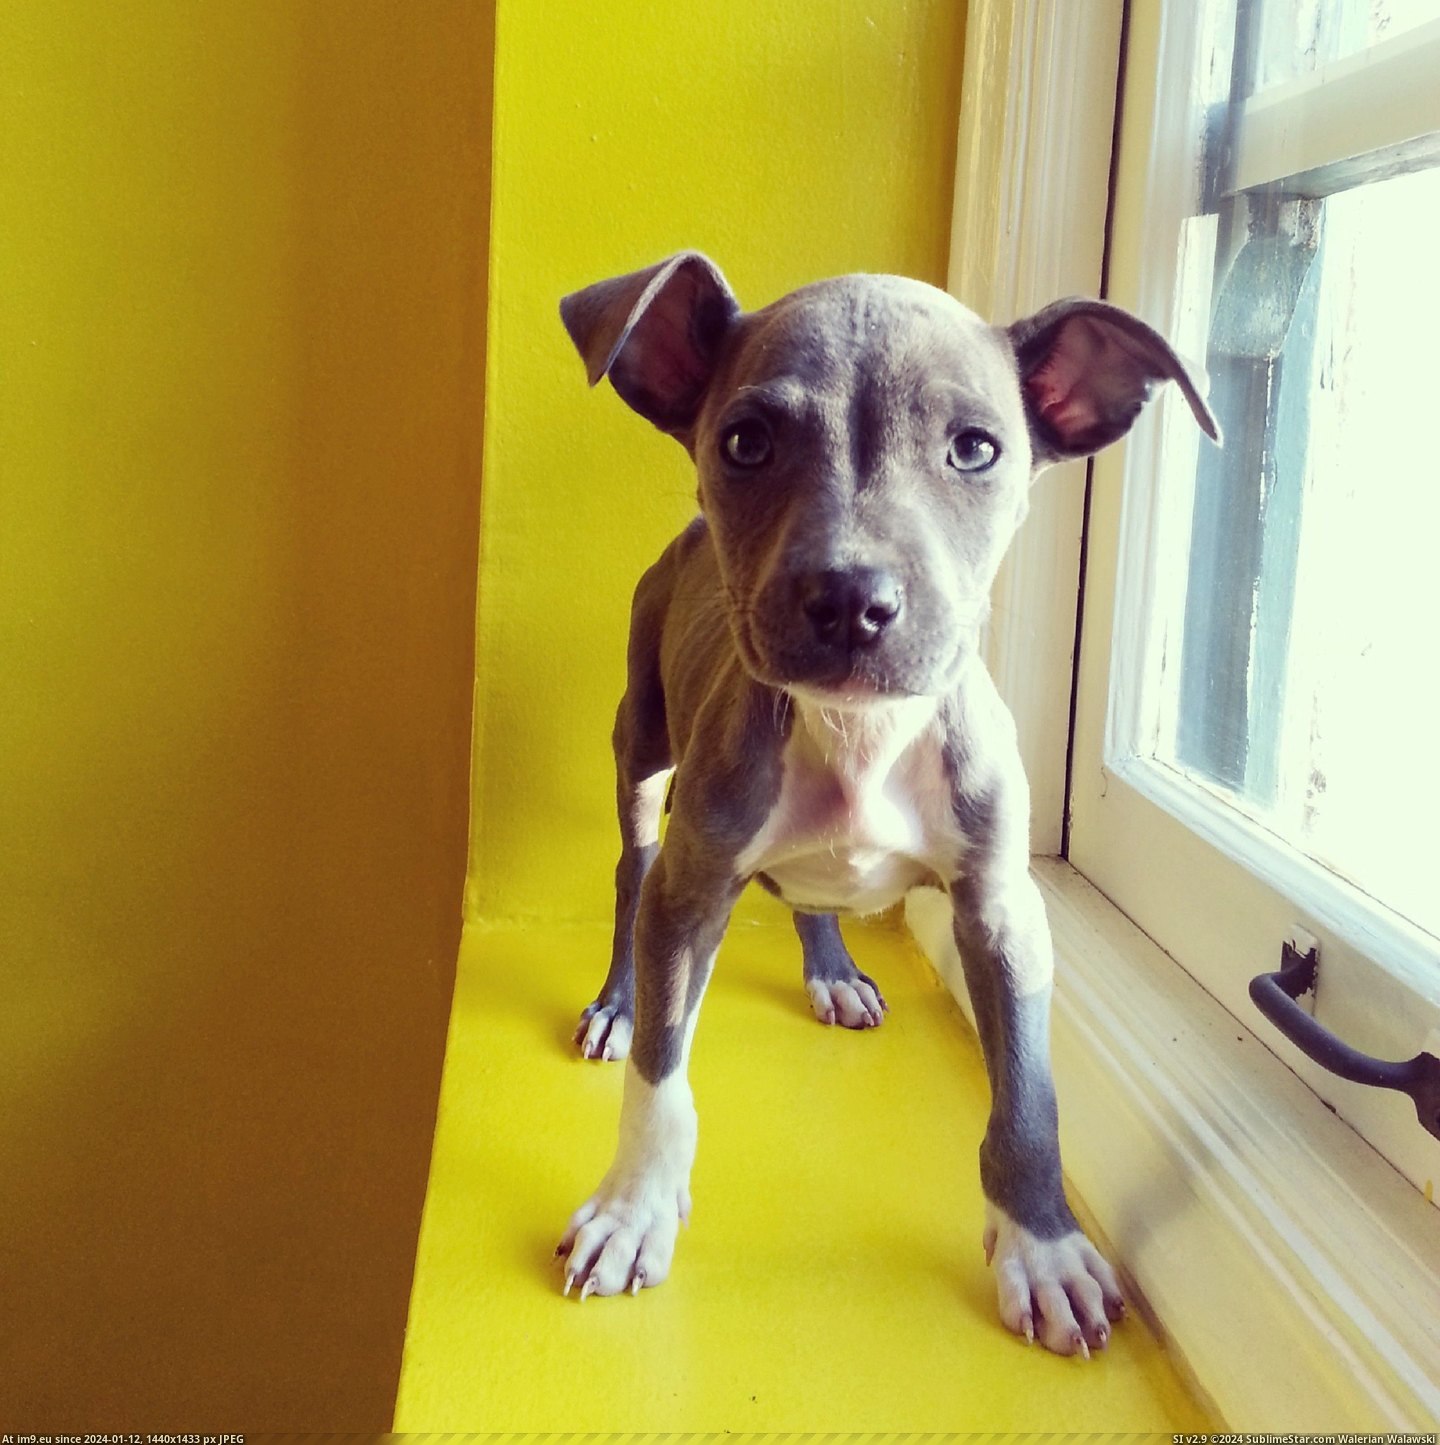 #Love #Was #Tiny #Mexico #Pit #Luna #Malnourished #She #Meet #Brought [Aww] She was malnourished and in need of love at the U.S.-Mexico border, so I brought her home. Meet my tiny pit, Luna. Pic. (Image of album My r/AWW favs))